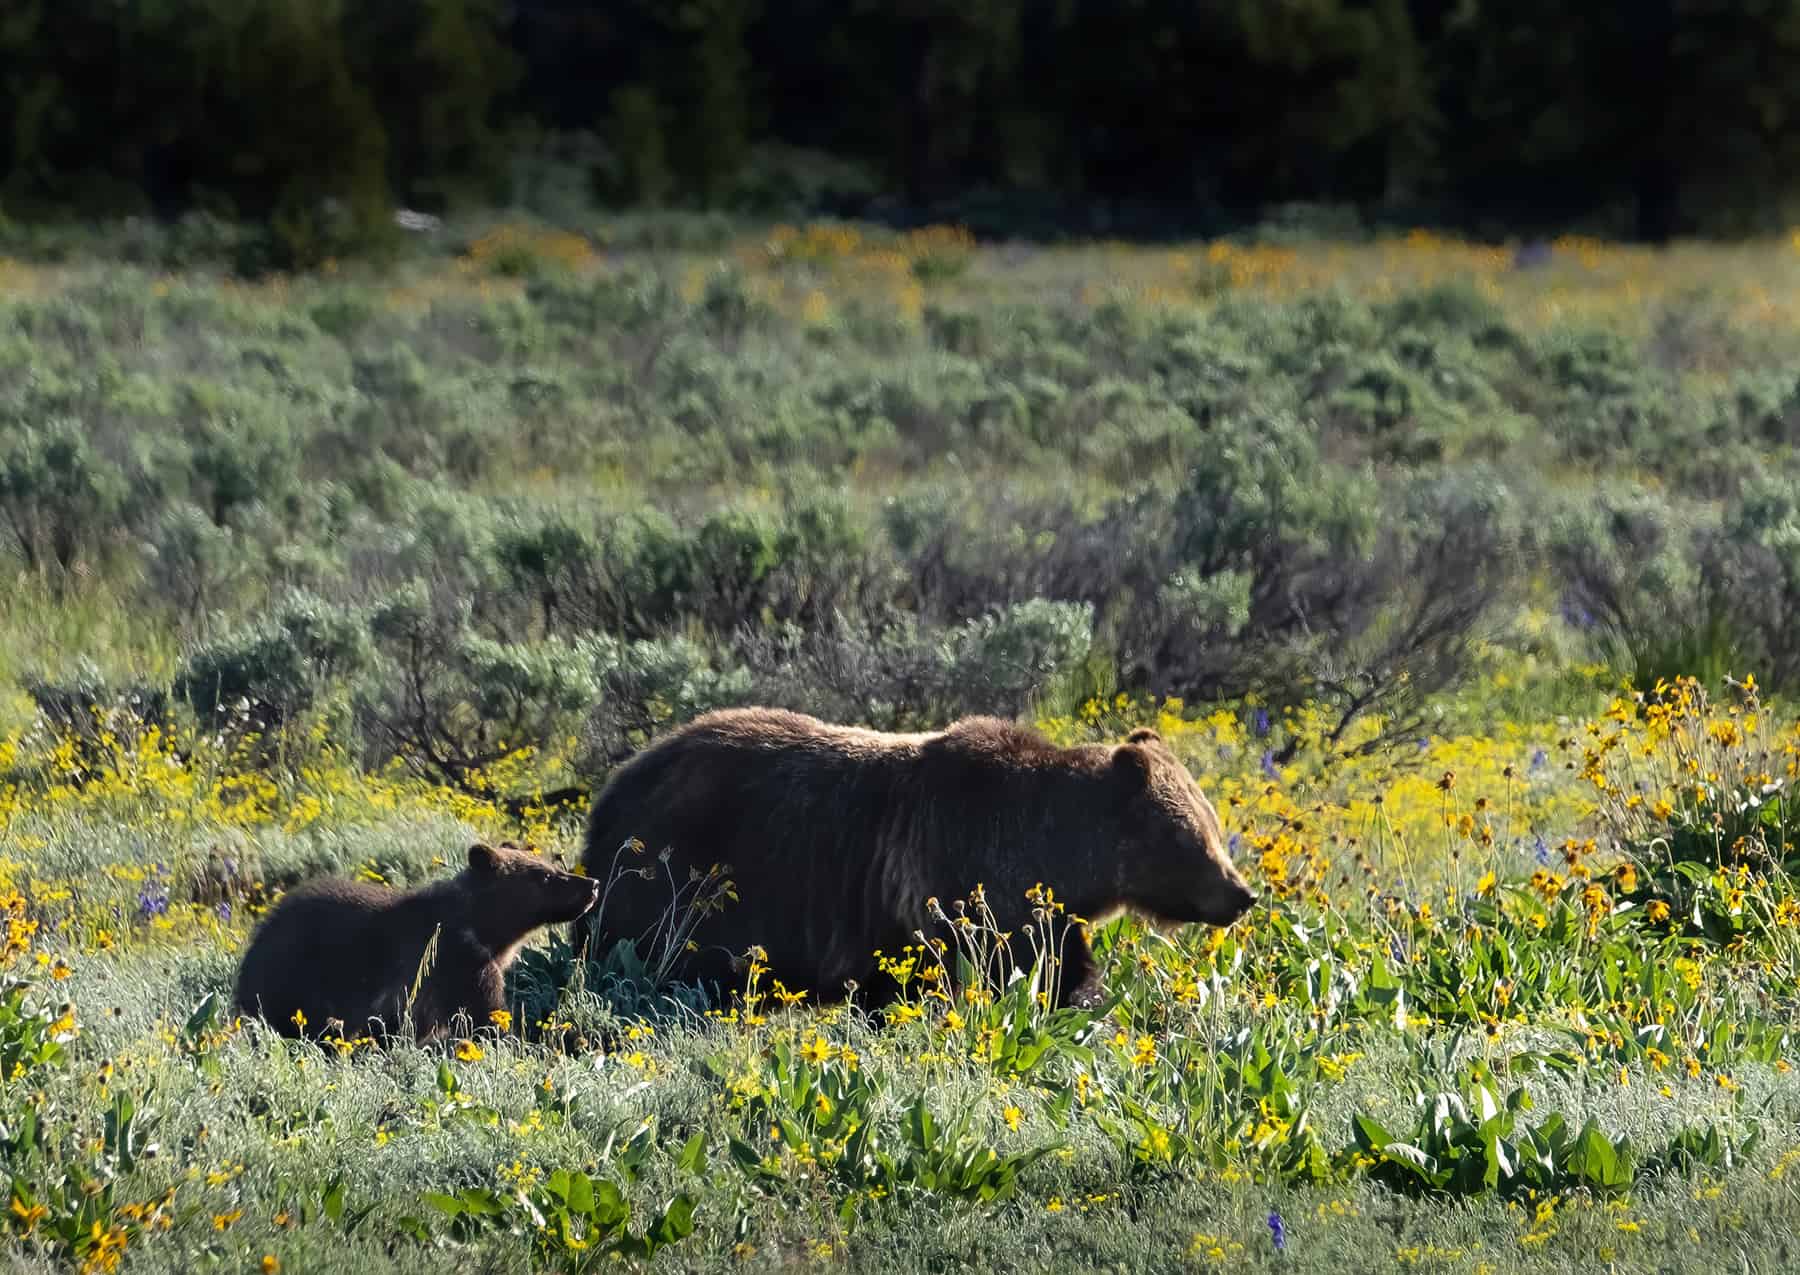 Grizzly 399 and Cub-of-the-year